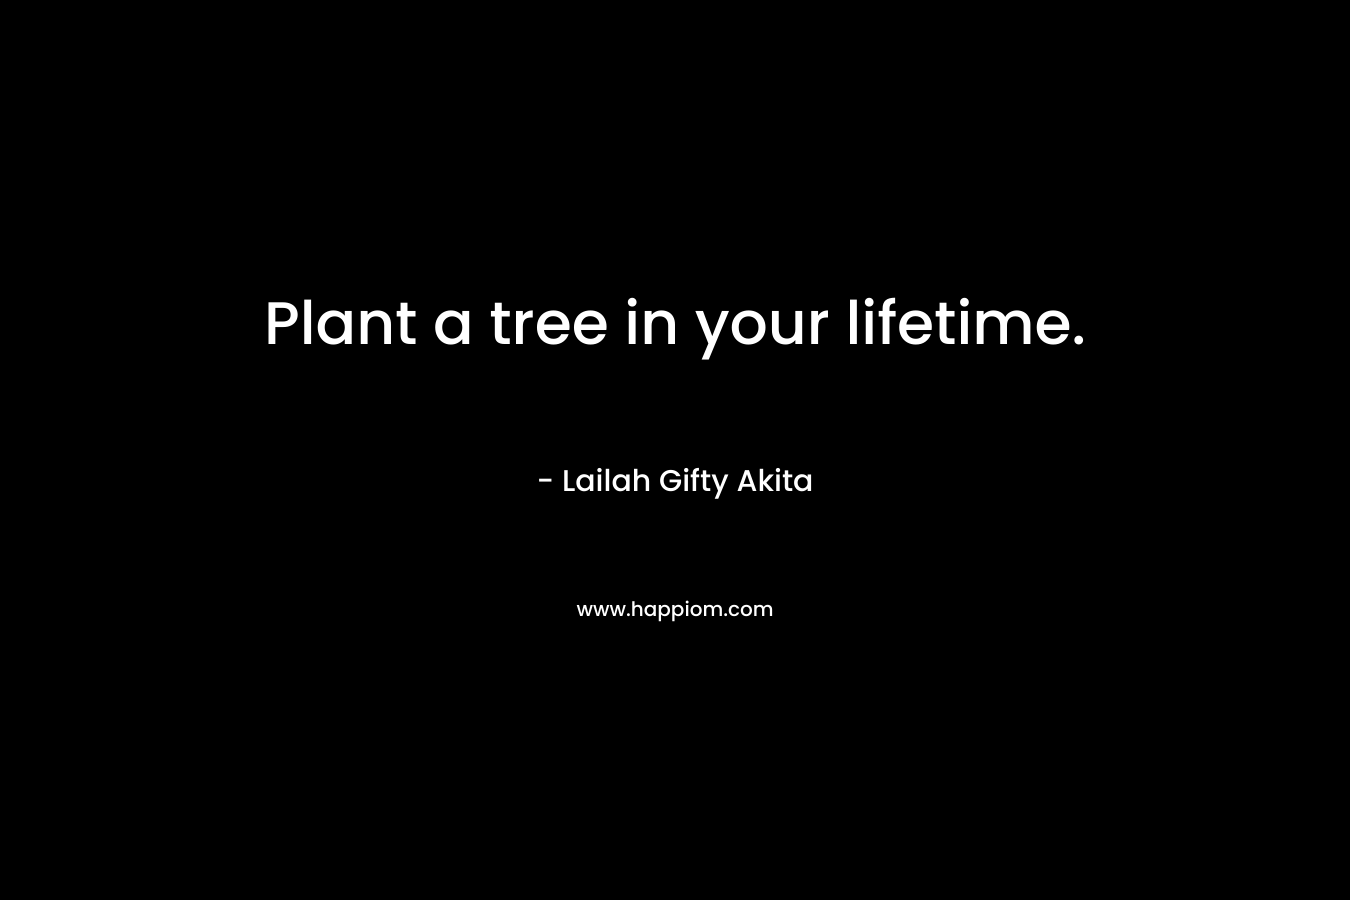 Plant a tree in your lifetime.